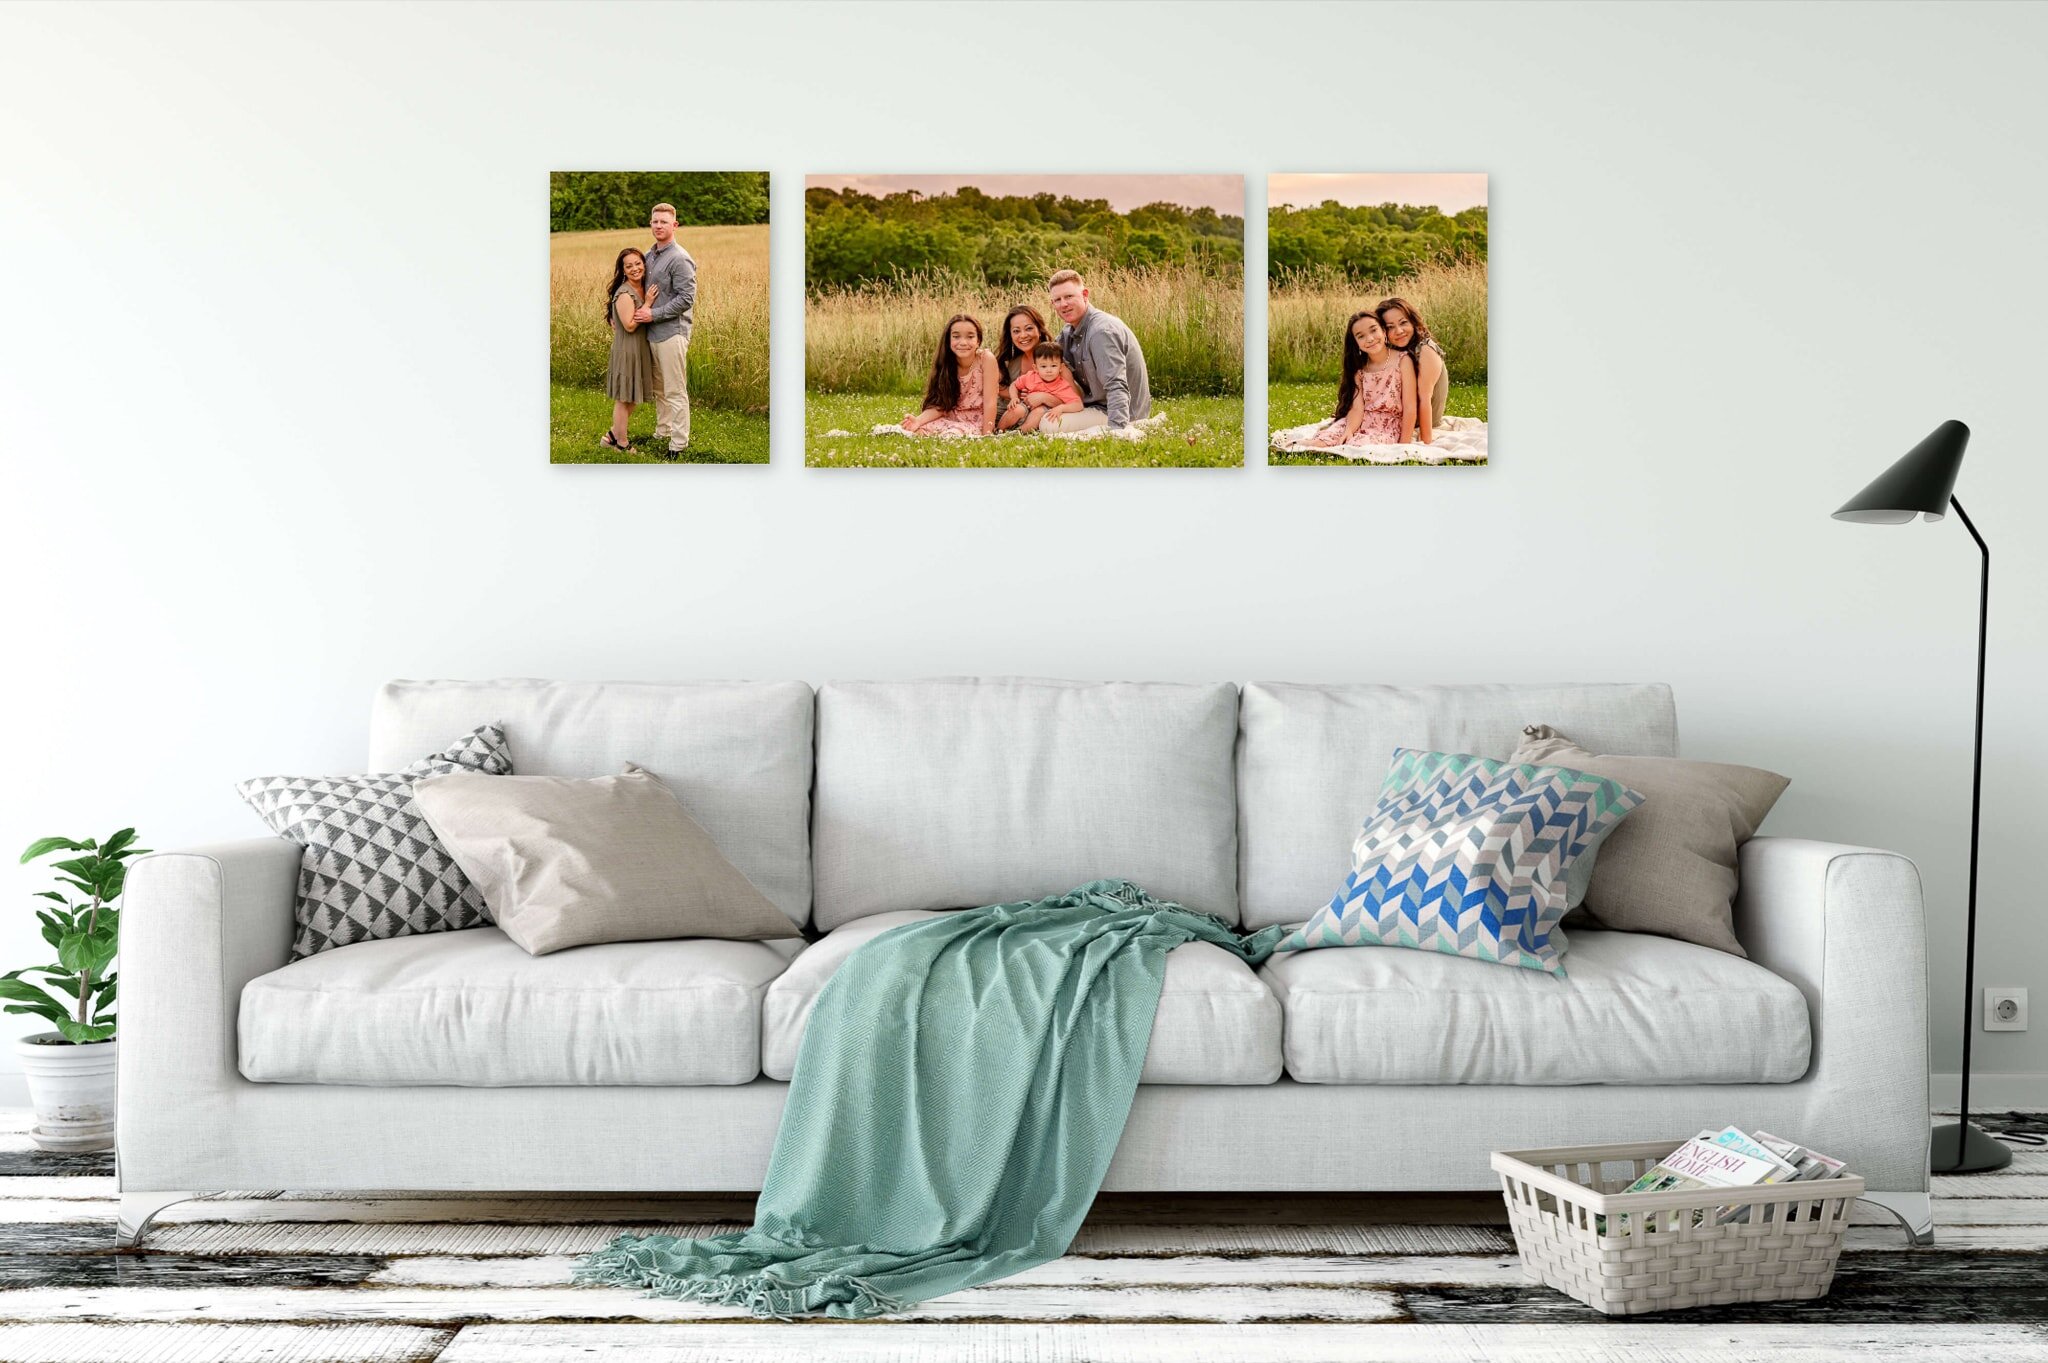 Wall Art Gallery | Little Snaps Photography